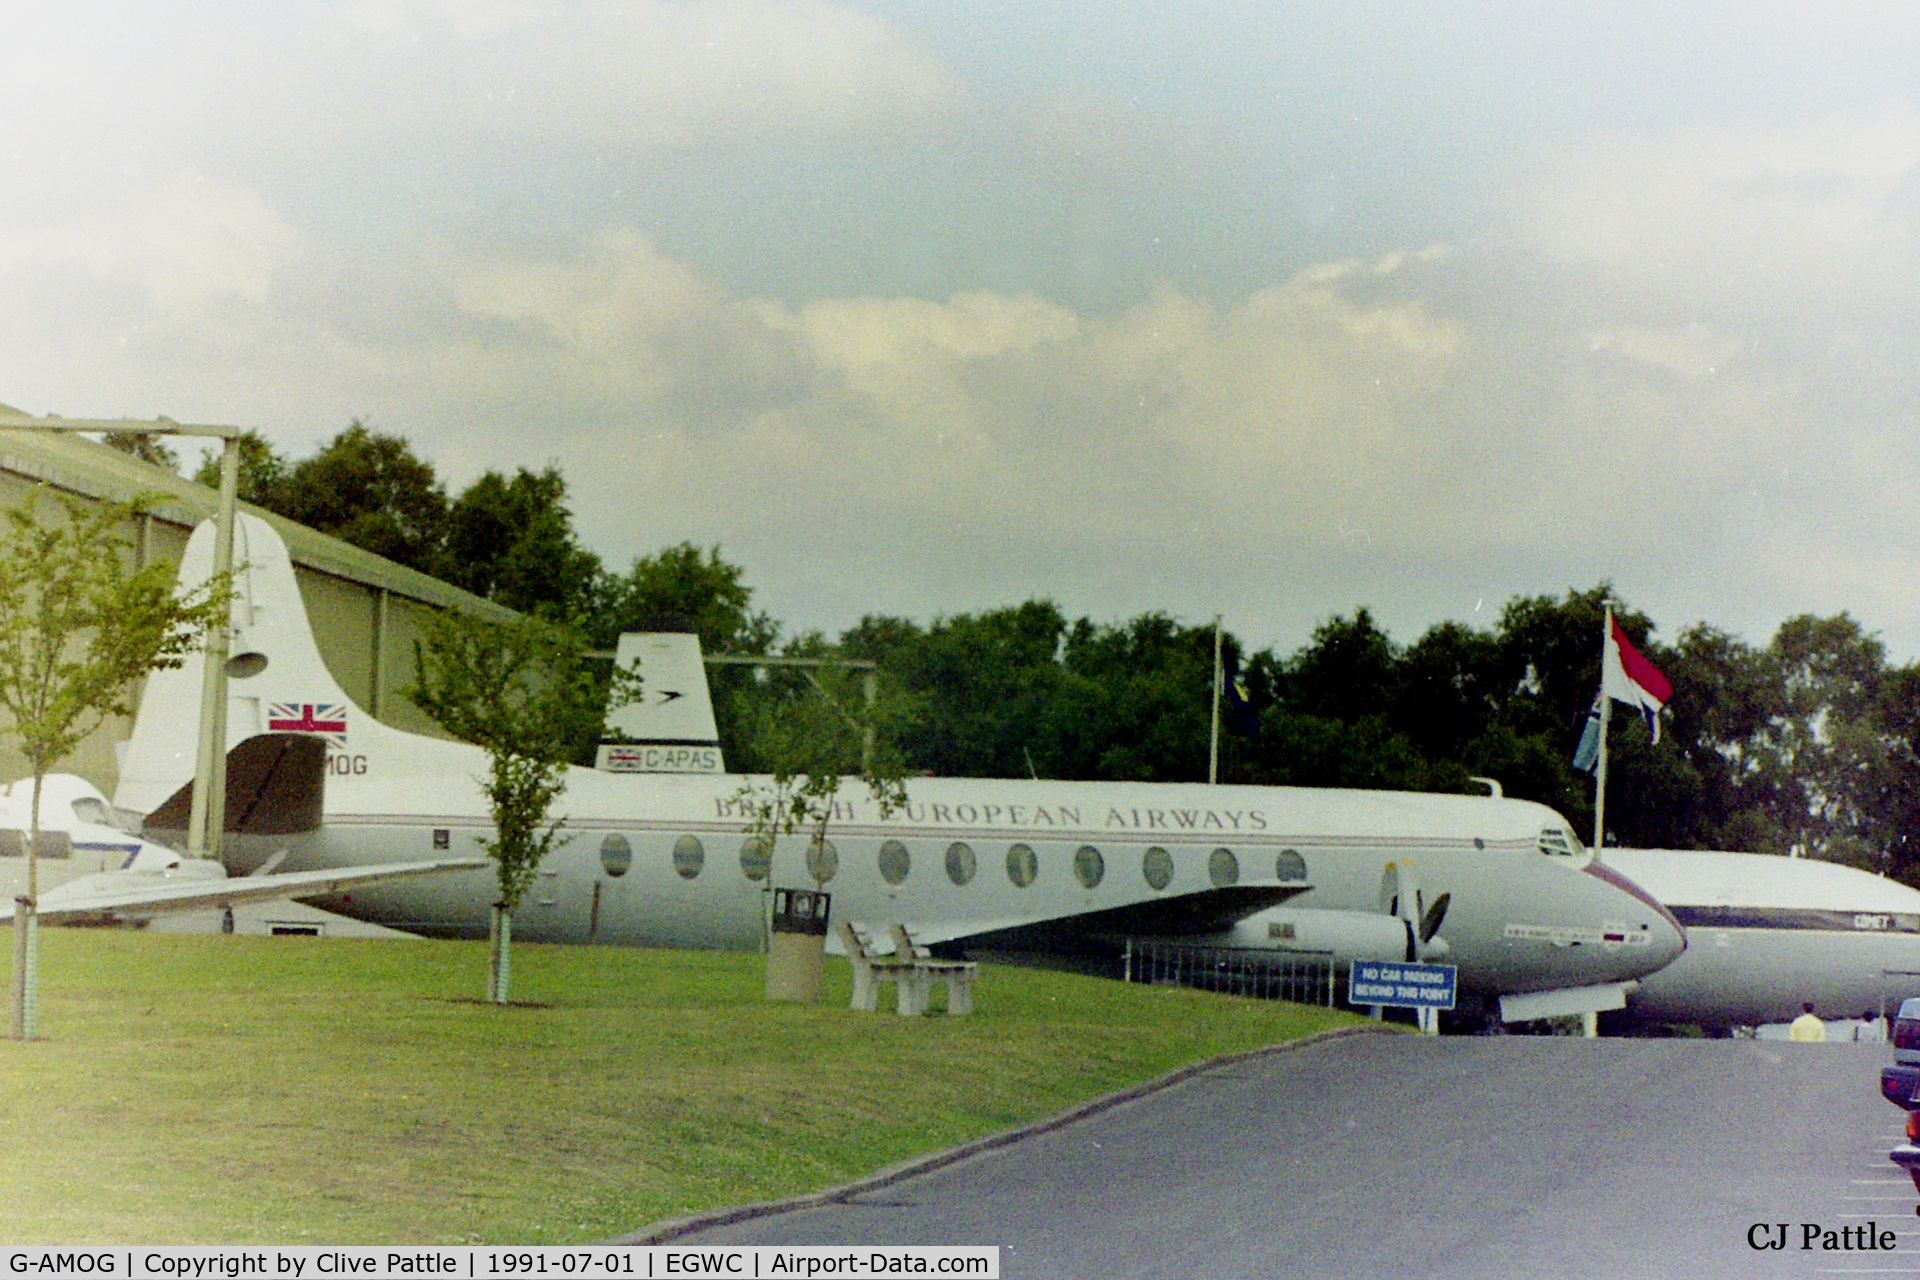 G-AMOG, 1953 Vickers Viscount 701 C/N 7, A shot from 1991 when the British Airways Collection was still in existance and positioned externally at the RAF Museum at Cosford EGWC. The photo includes the now scrapped Viscount G-AMOG and the Comet G-APAS